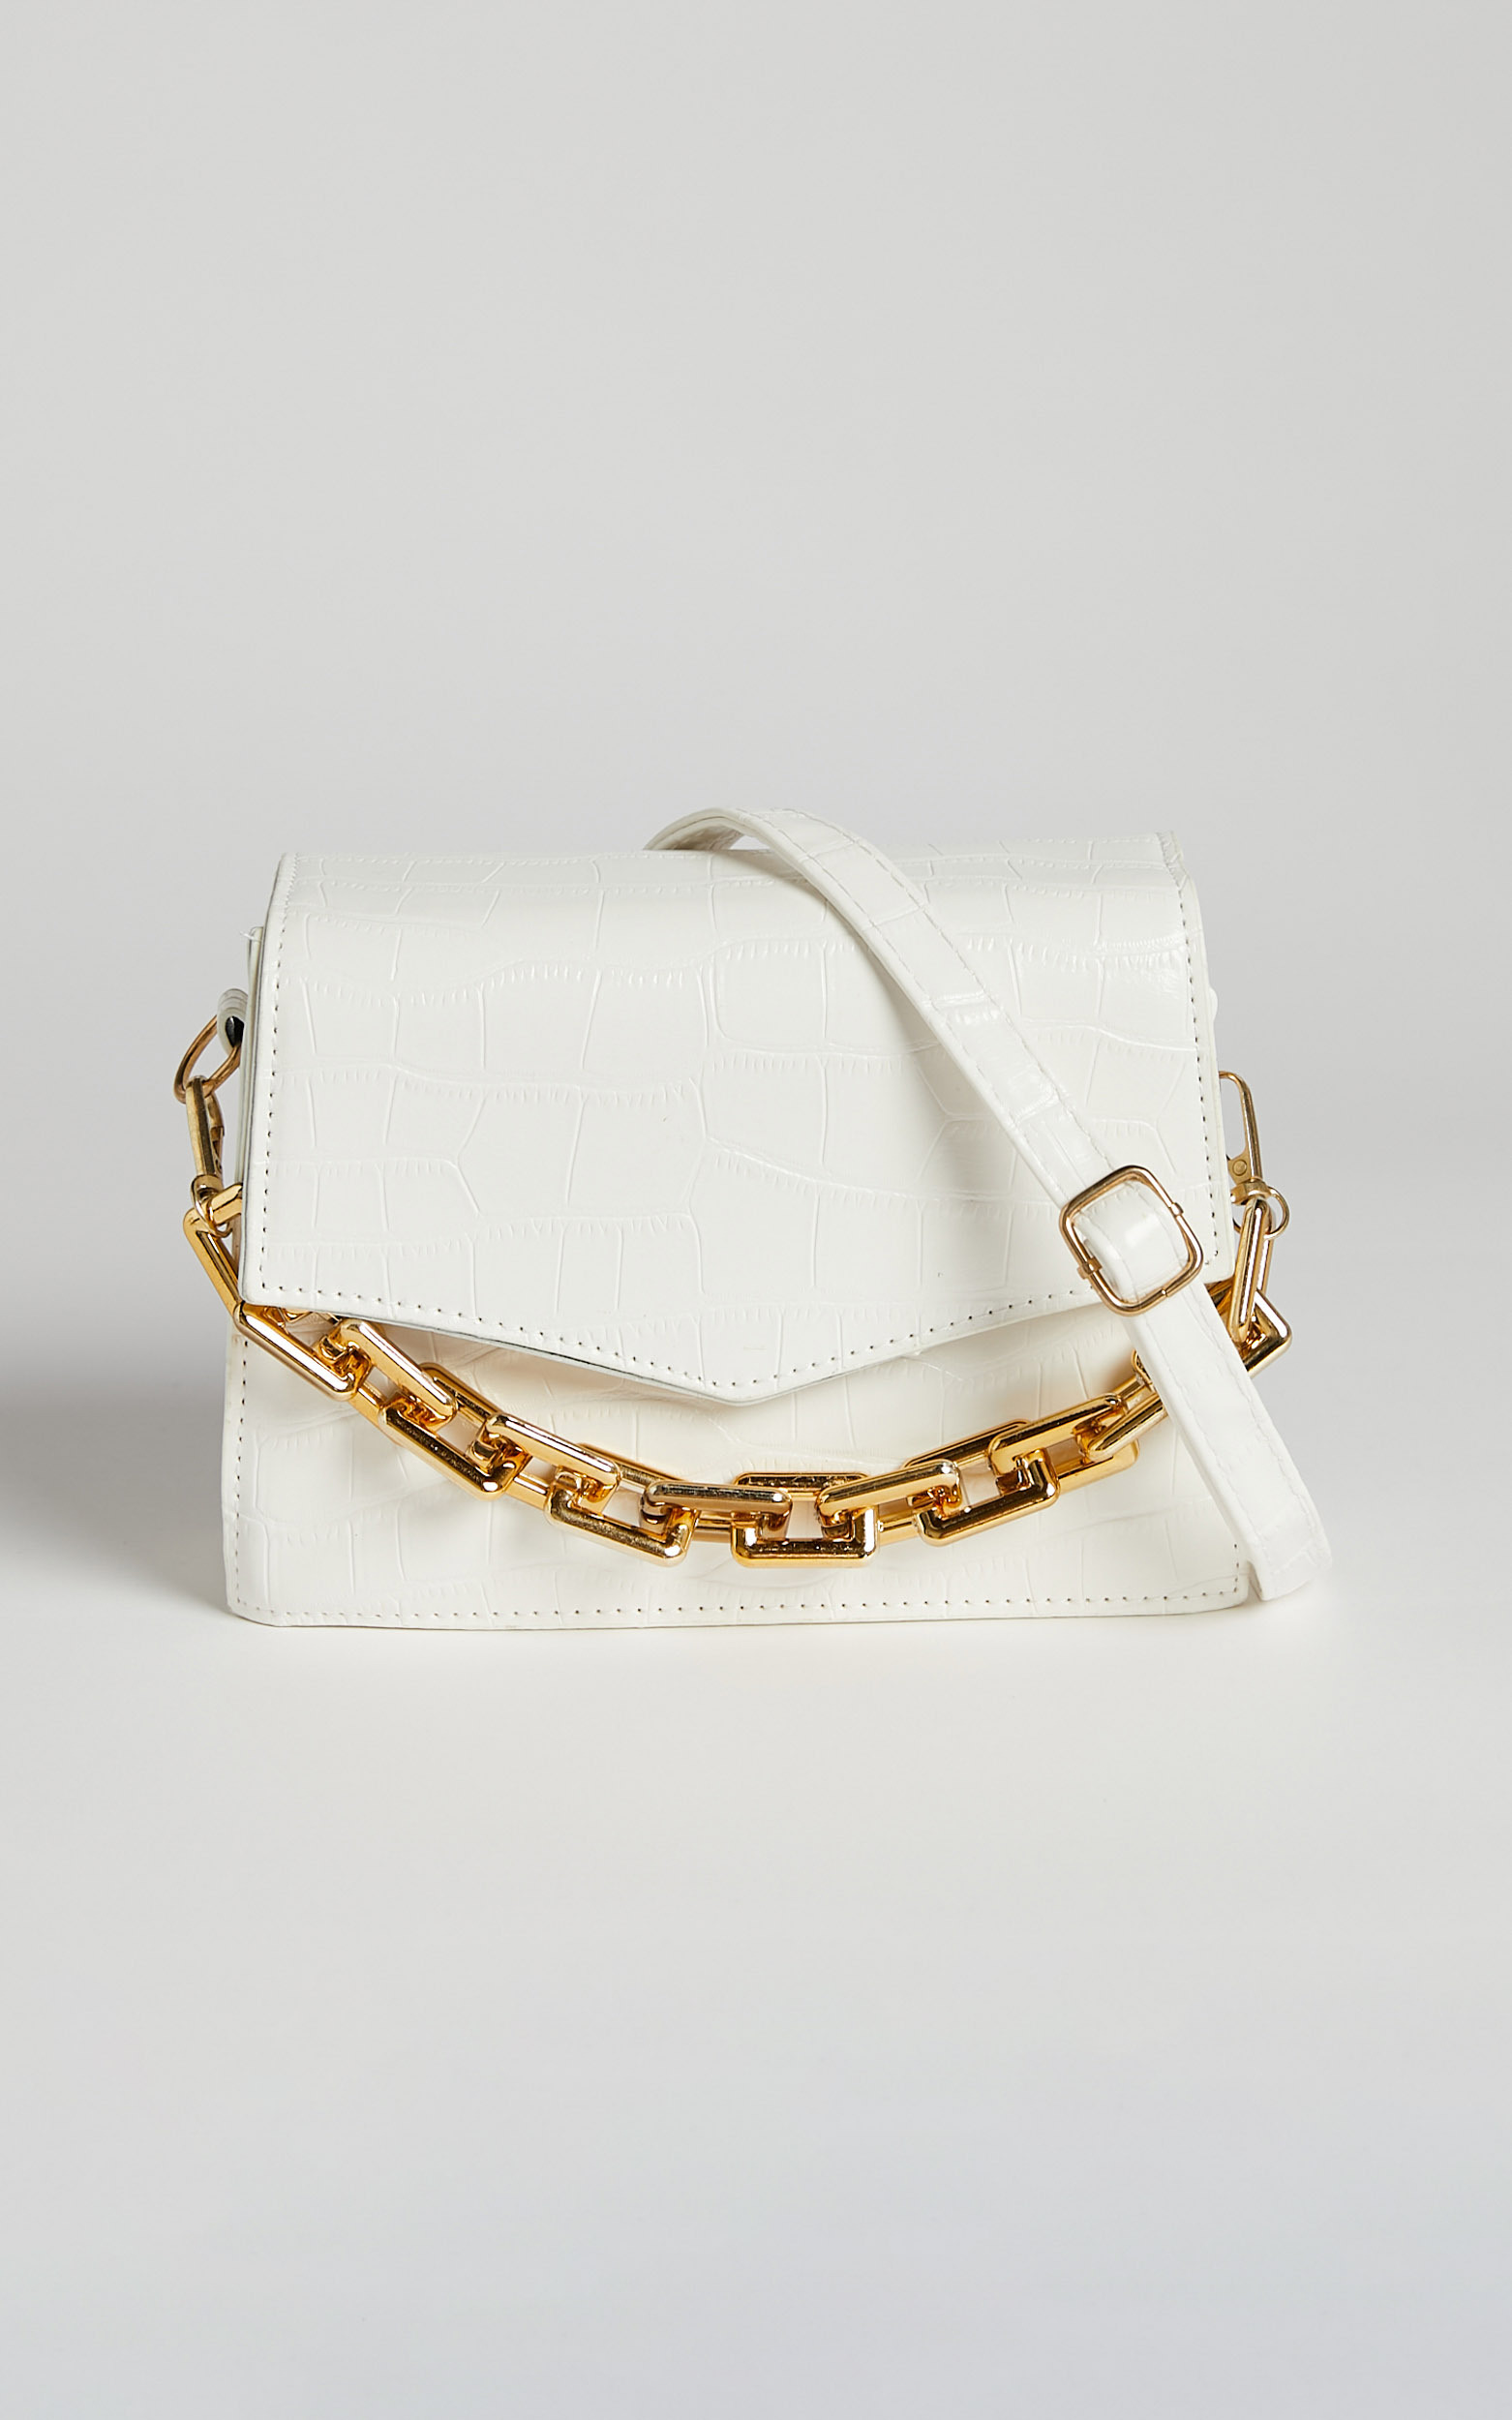 Penny Bag - Chain Detail Crossbody Bag in White Croc - NoSize, WHT2, hi-res image number null